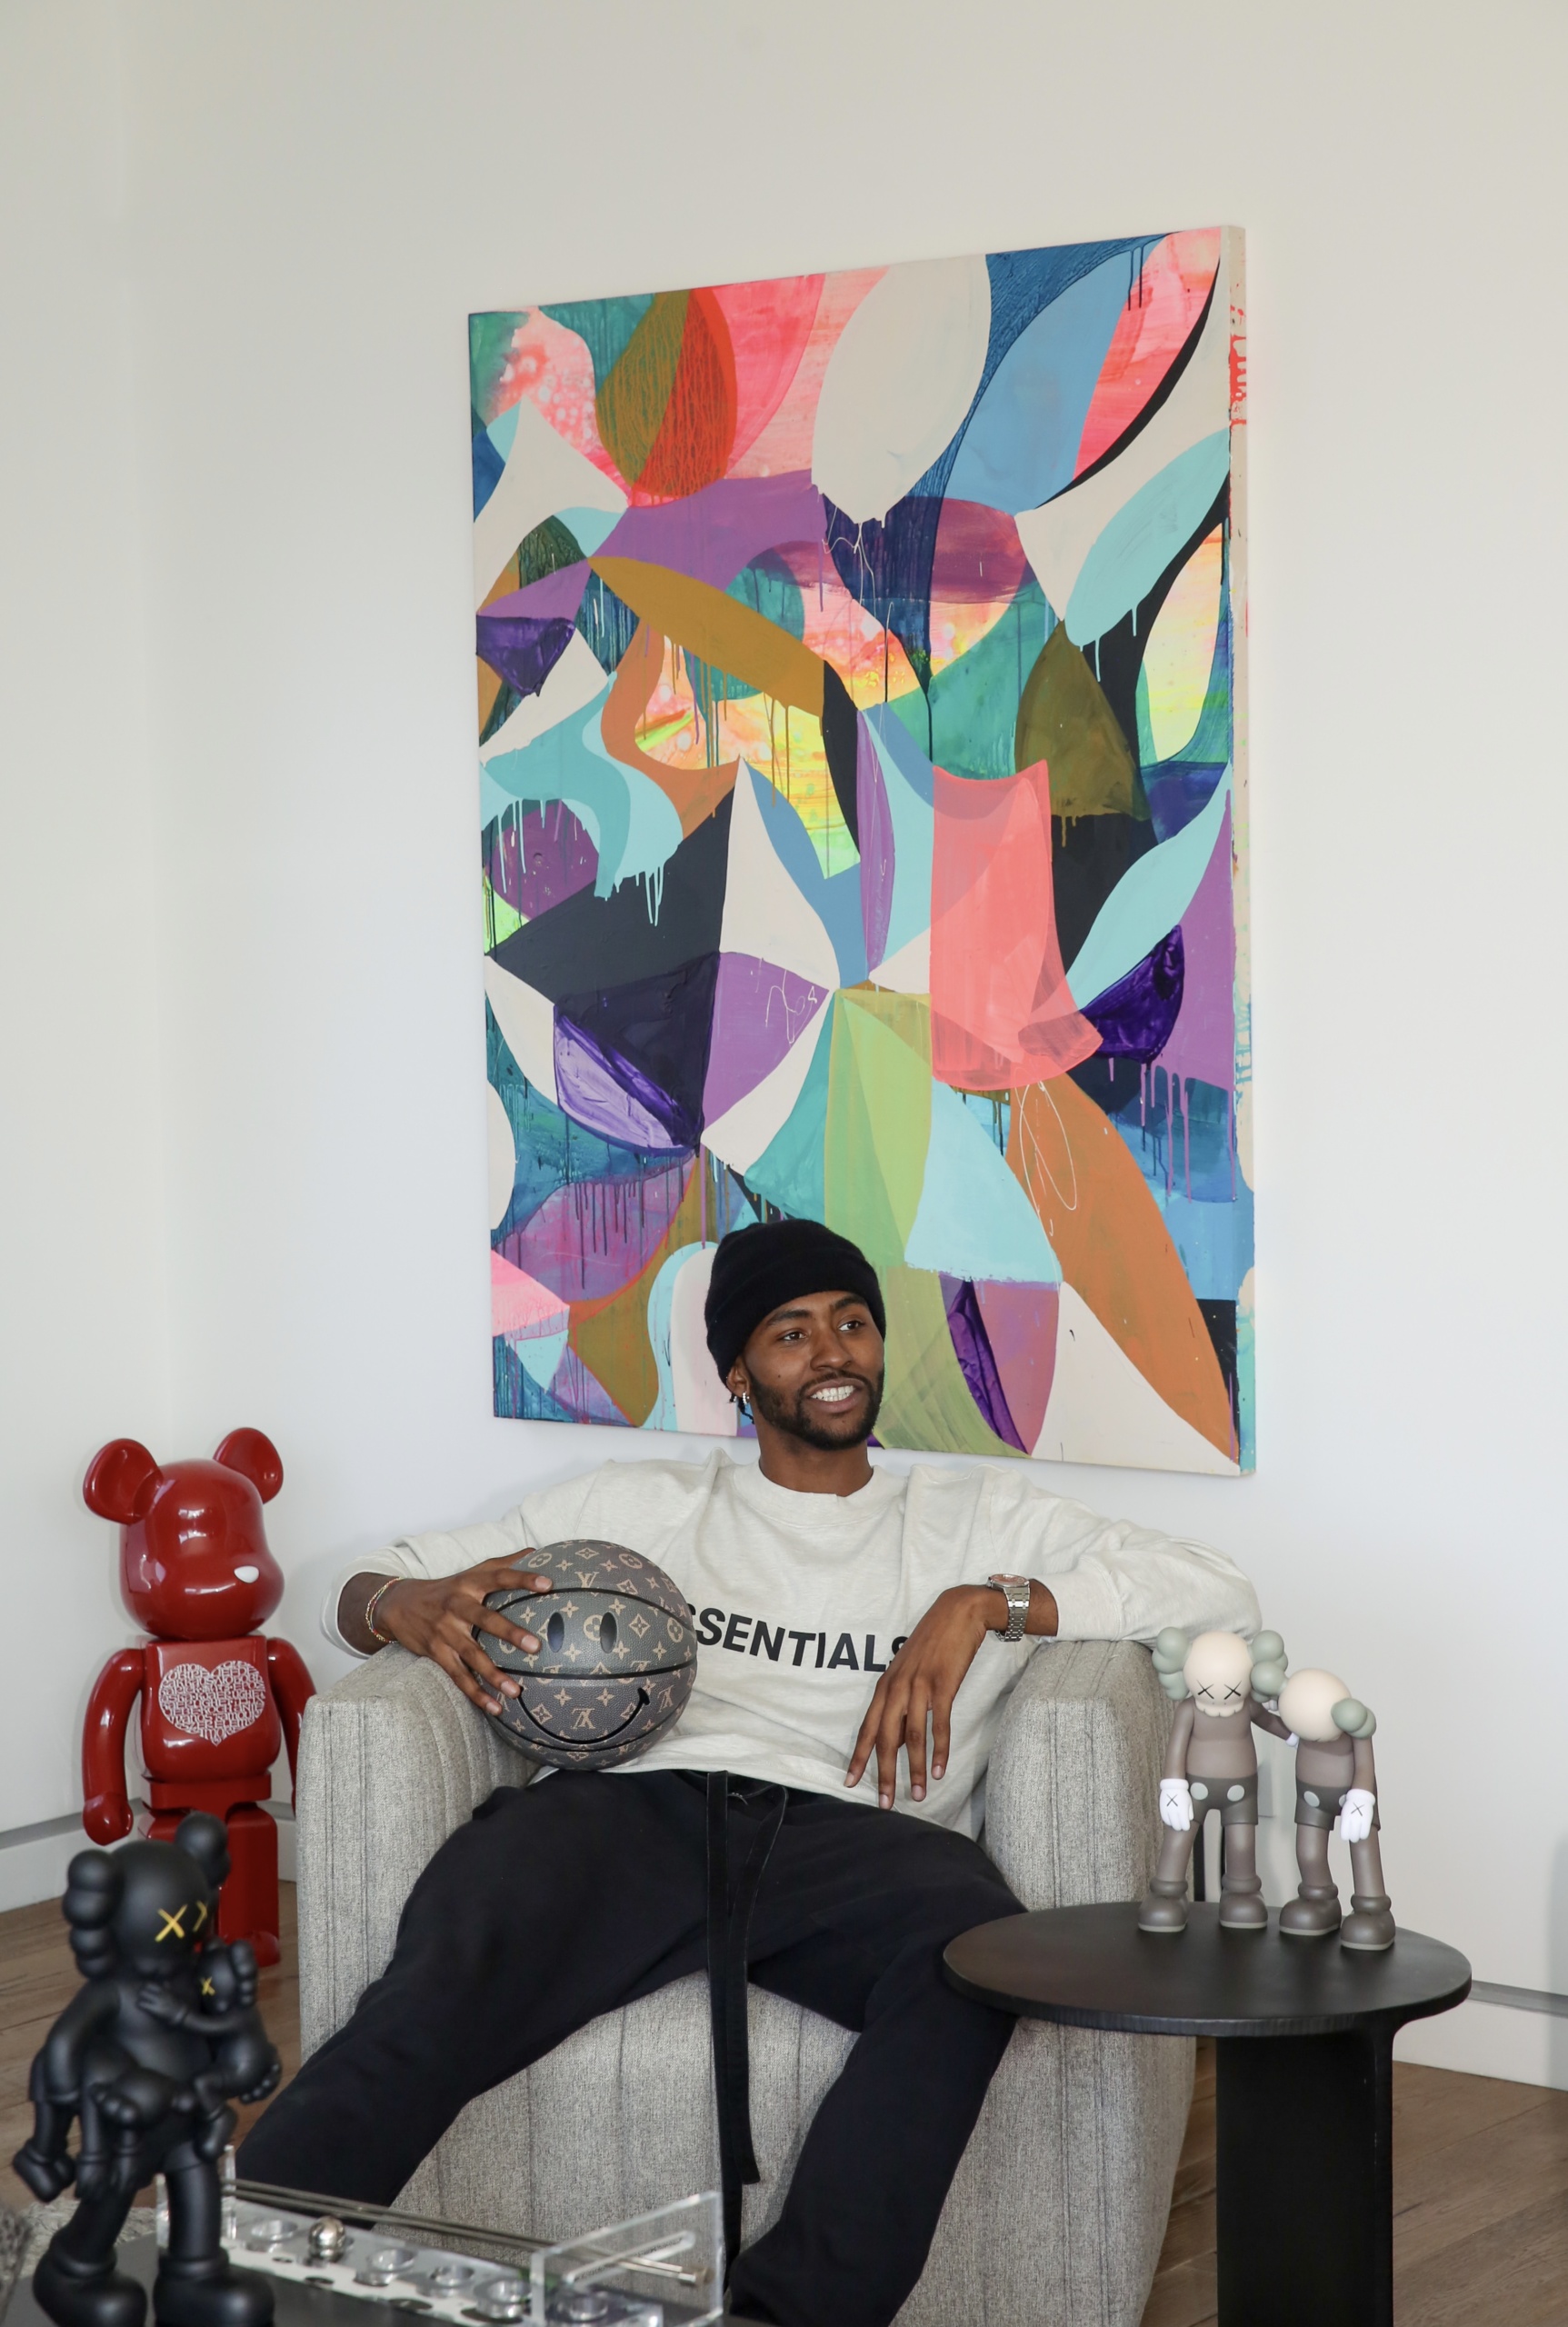 Miami Heat basketball star Moe Harkless at home in Los Angeles, featuring his collection of Kaws and BE@RBRICK statues and Maya Hayuk's painting Flow Chart.